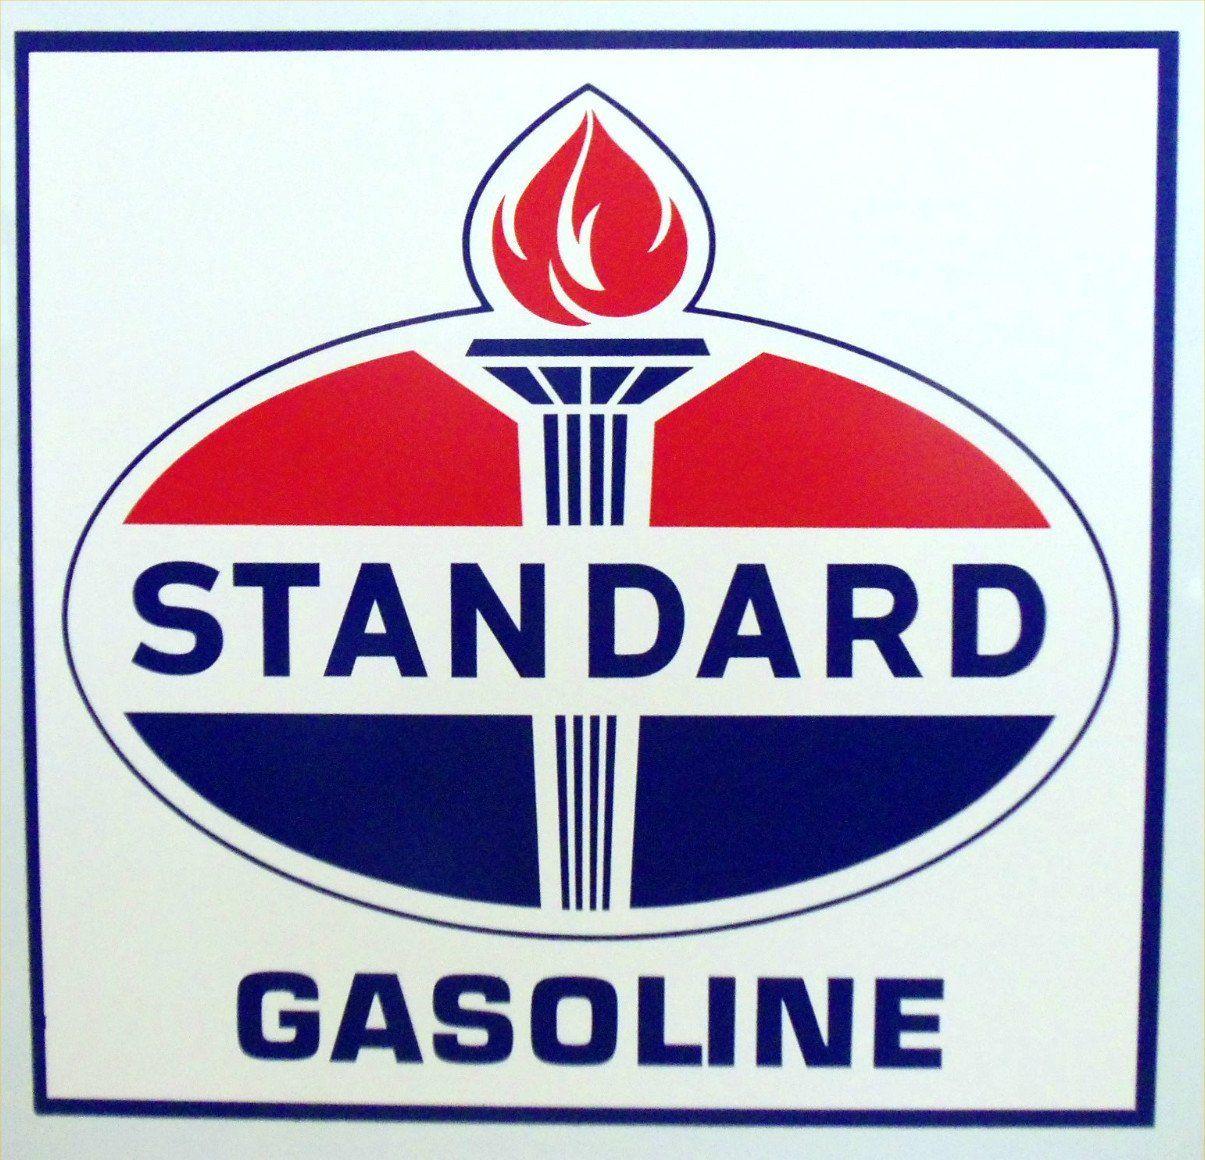 Standard Oil Company Logo - Standard Oil Company of New Jersey and New York were incorporated ...